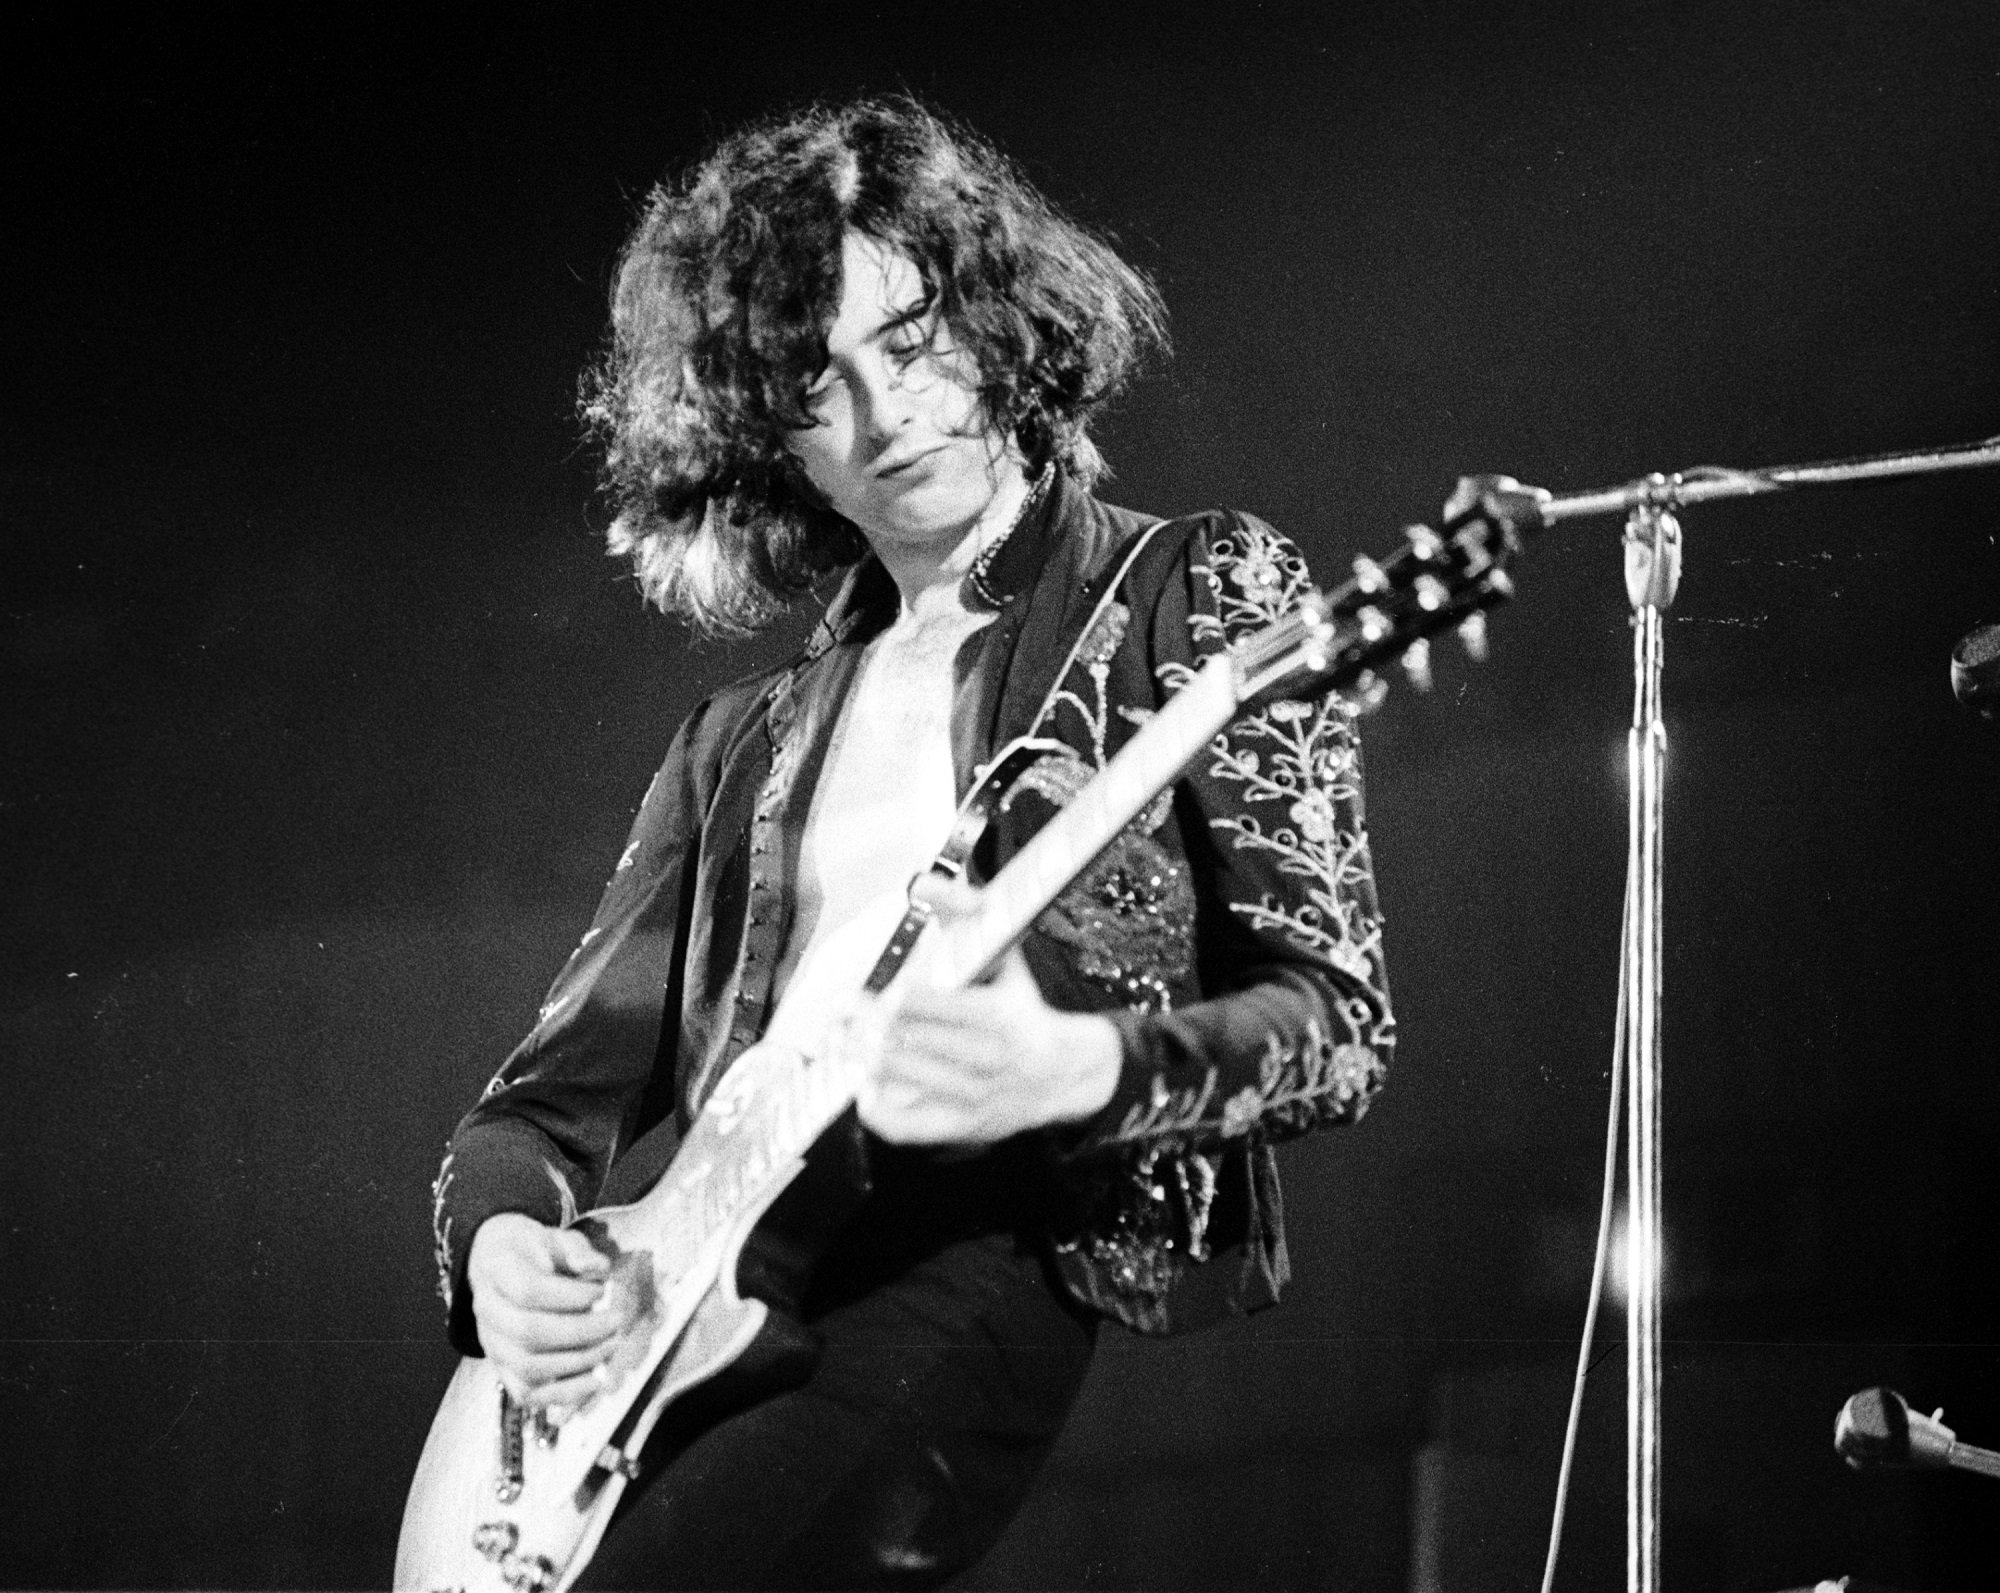 In 1961 Jimmy Page Teamed up With a Poet to Score His Performance Art